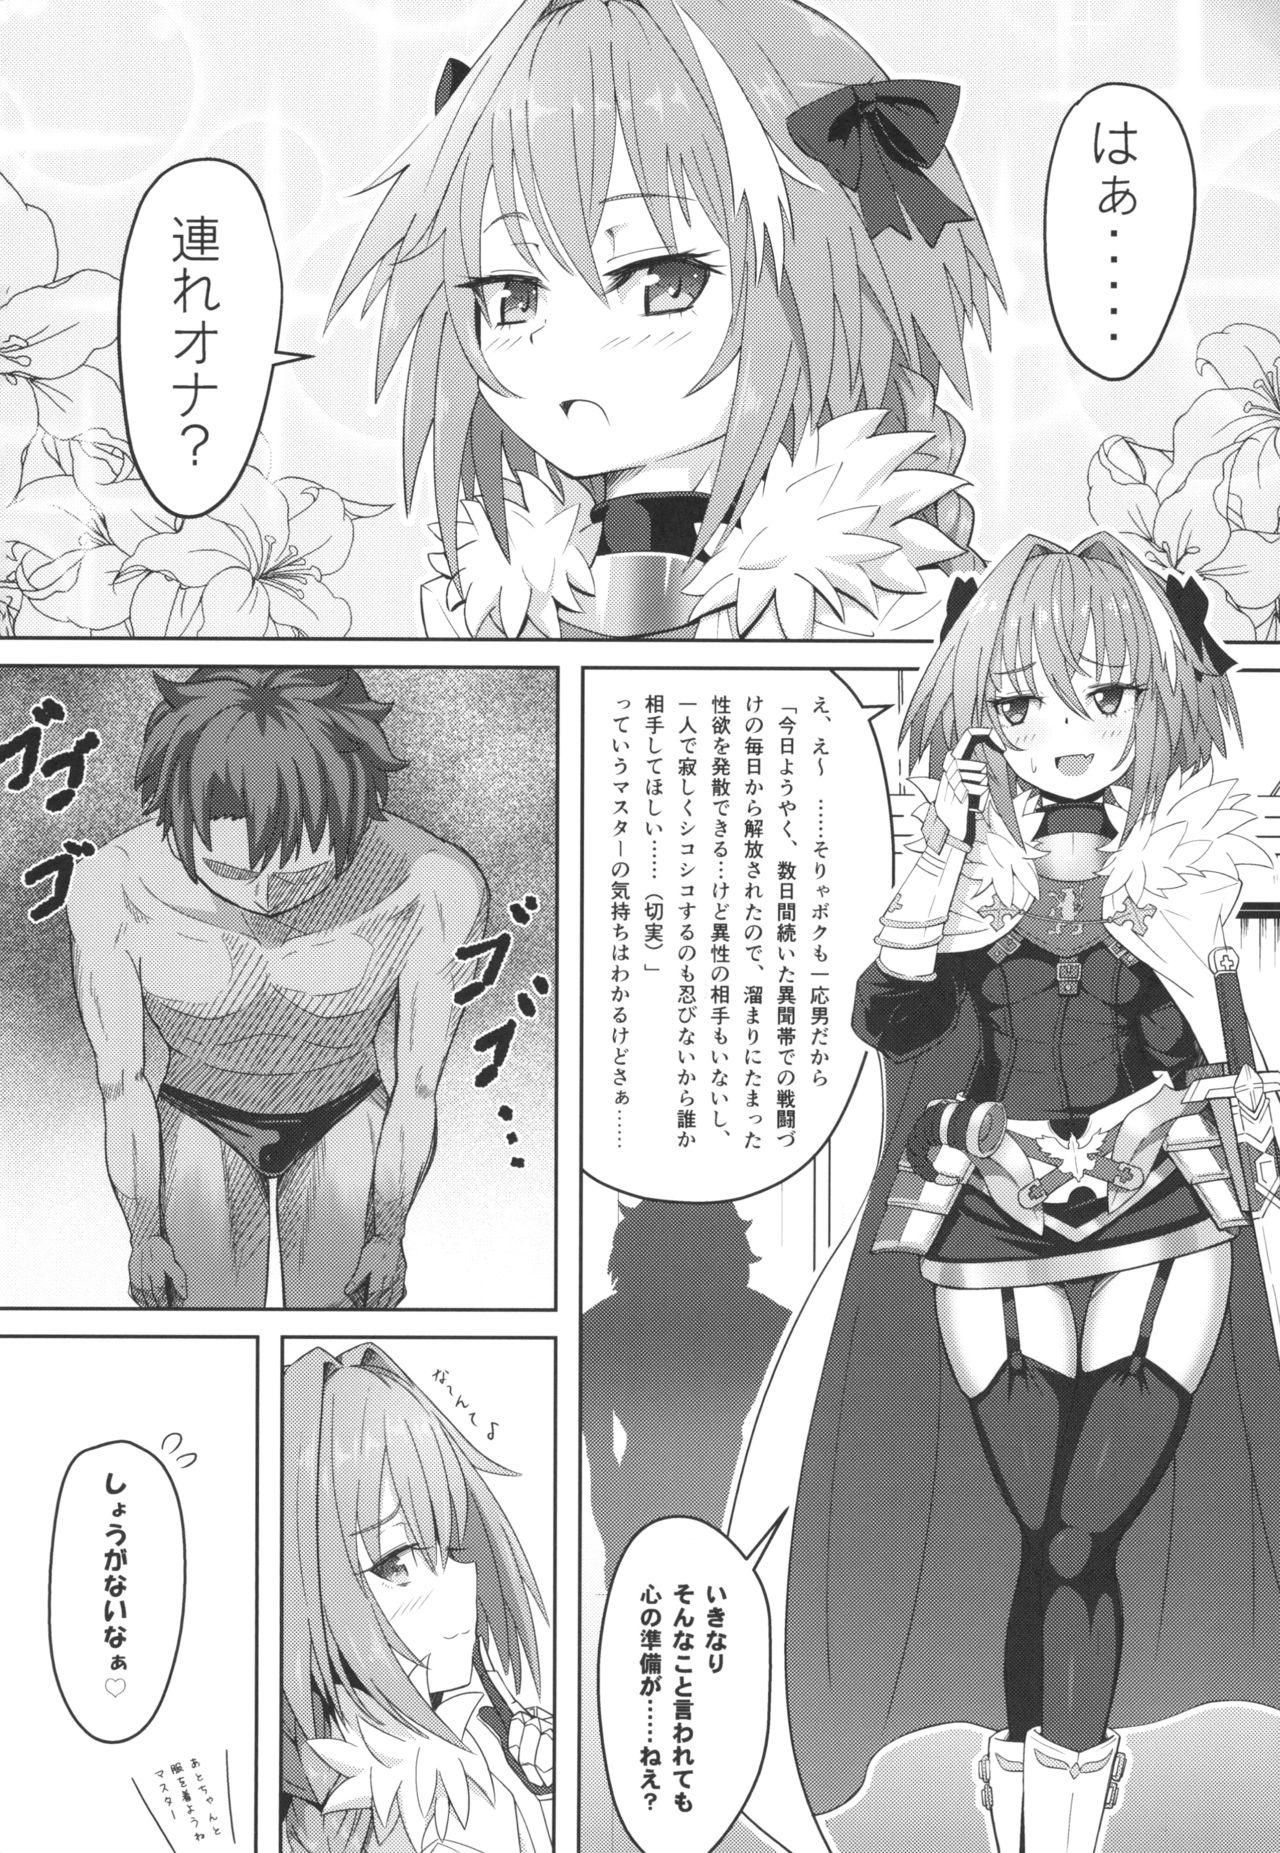 Jerkoff Tsure Tolfo! - Fate grand order Smoking - Page 3